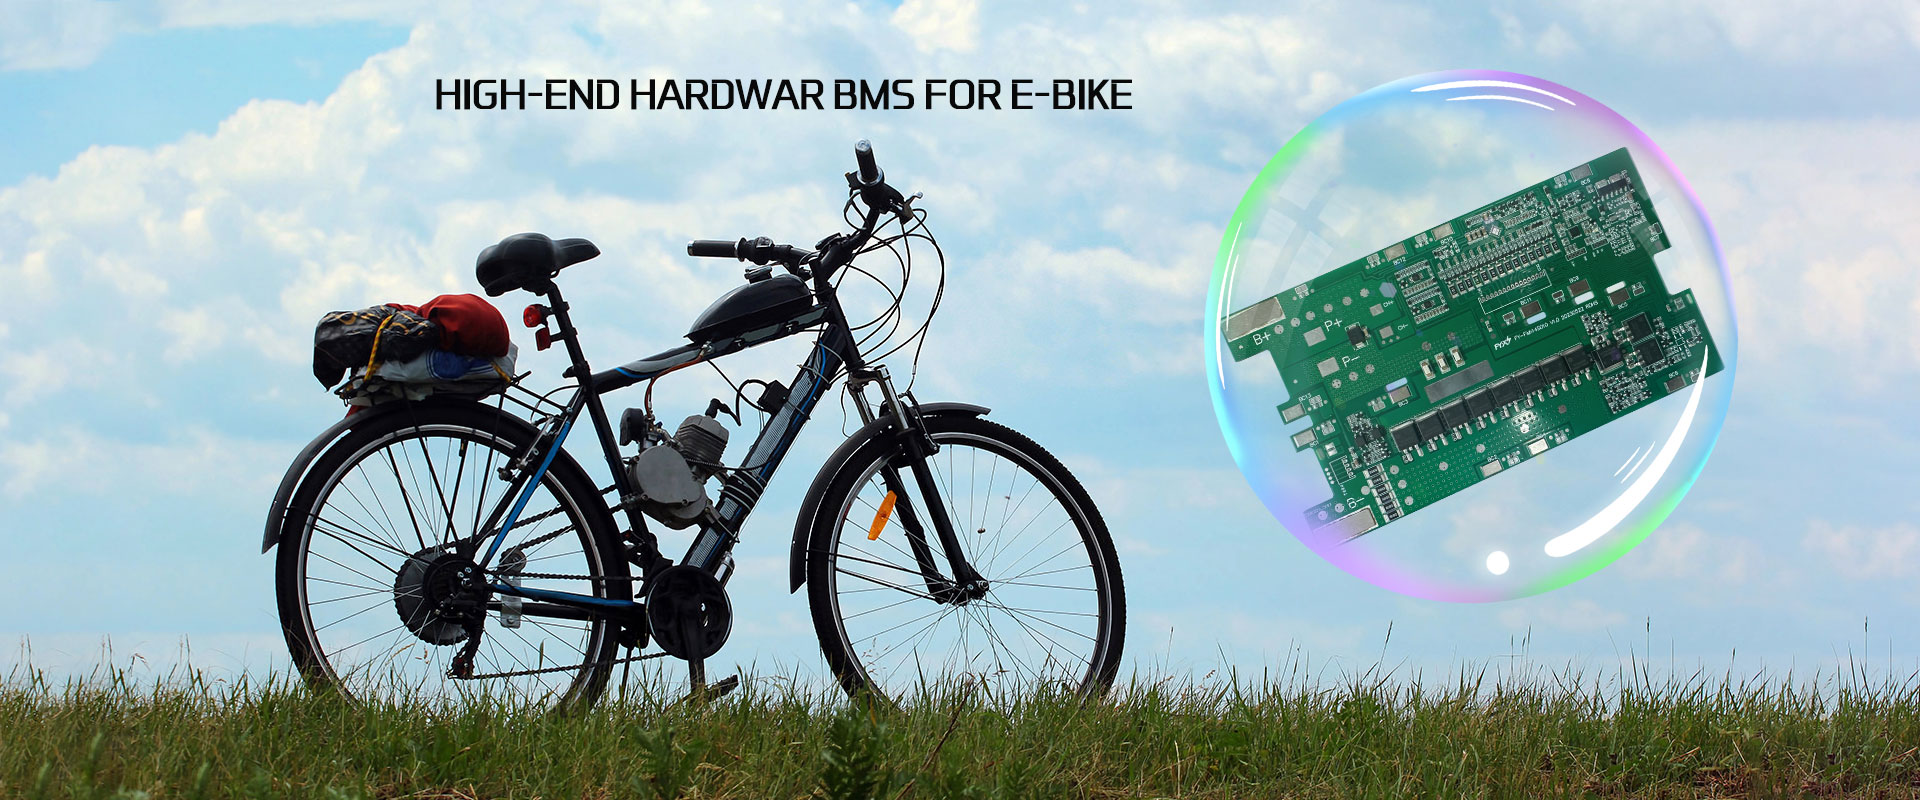 BMS for E-Bike Suppliers